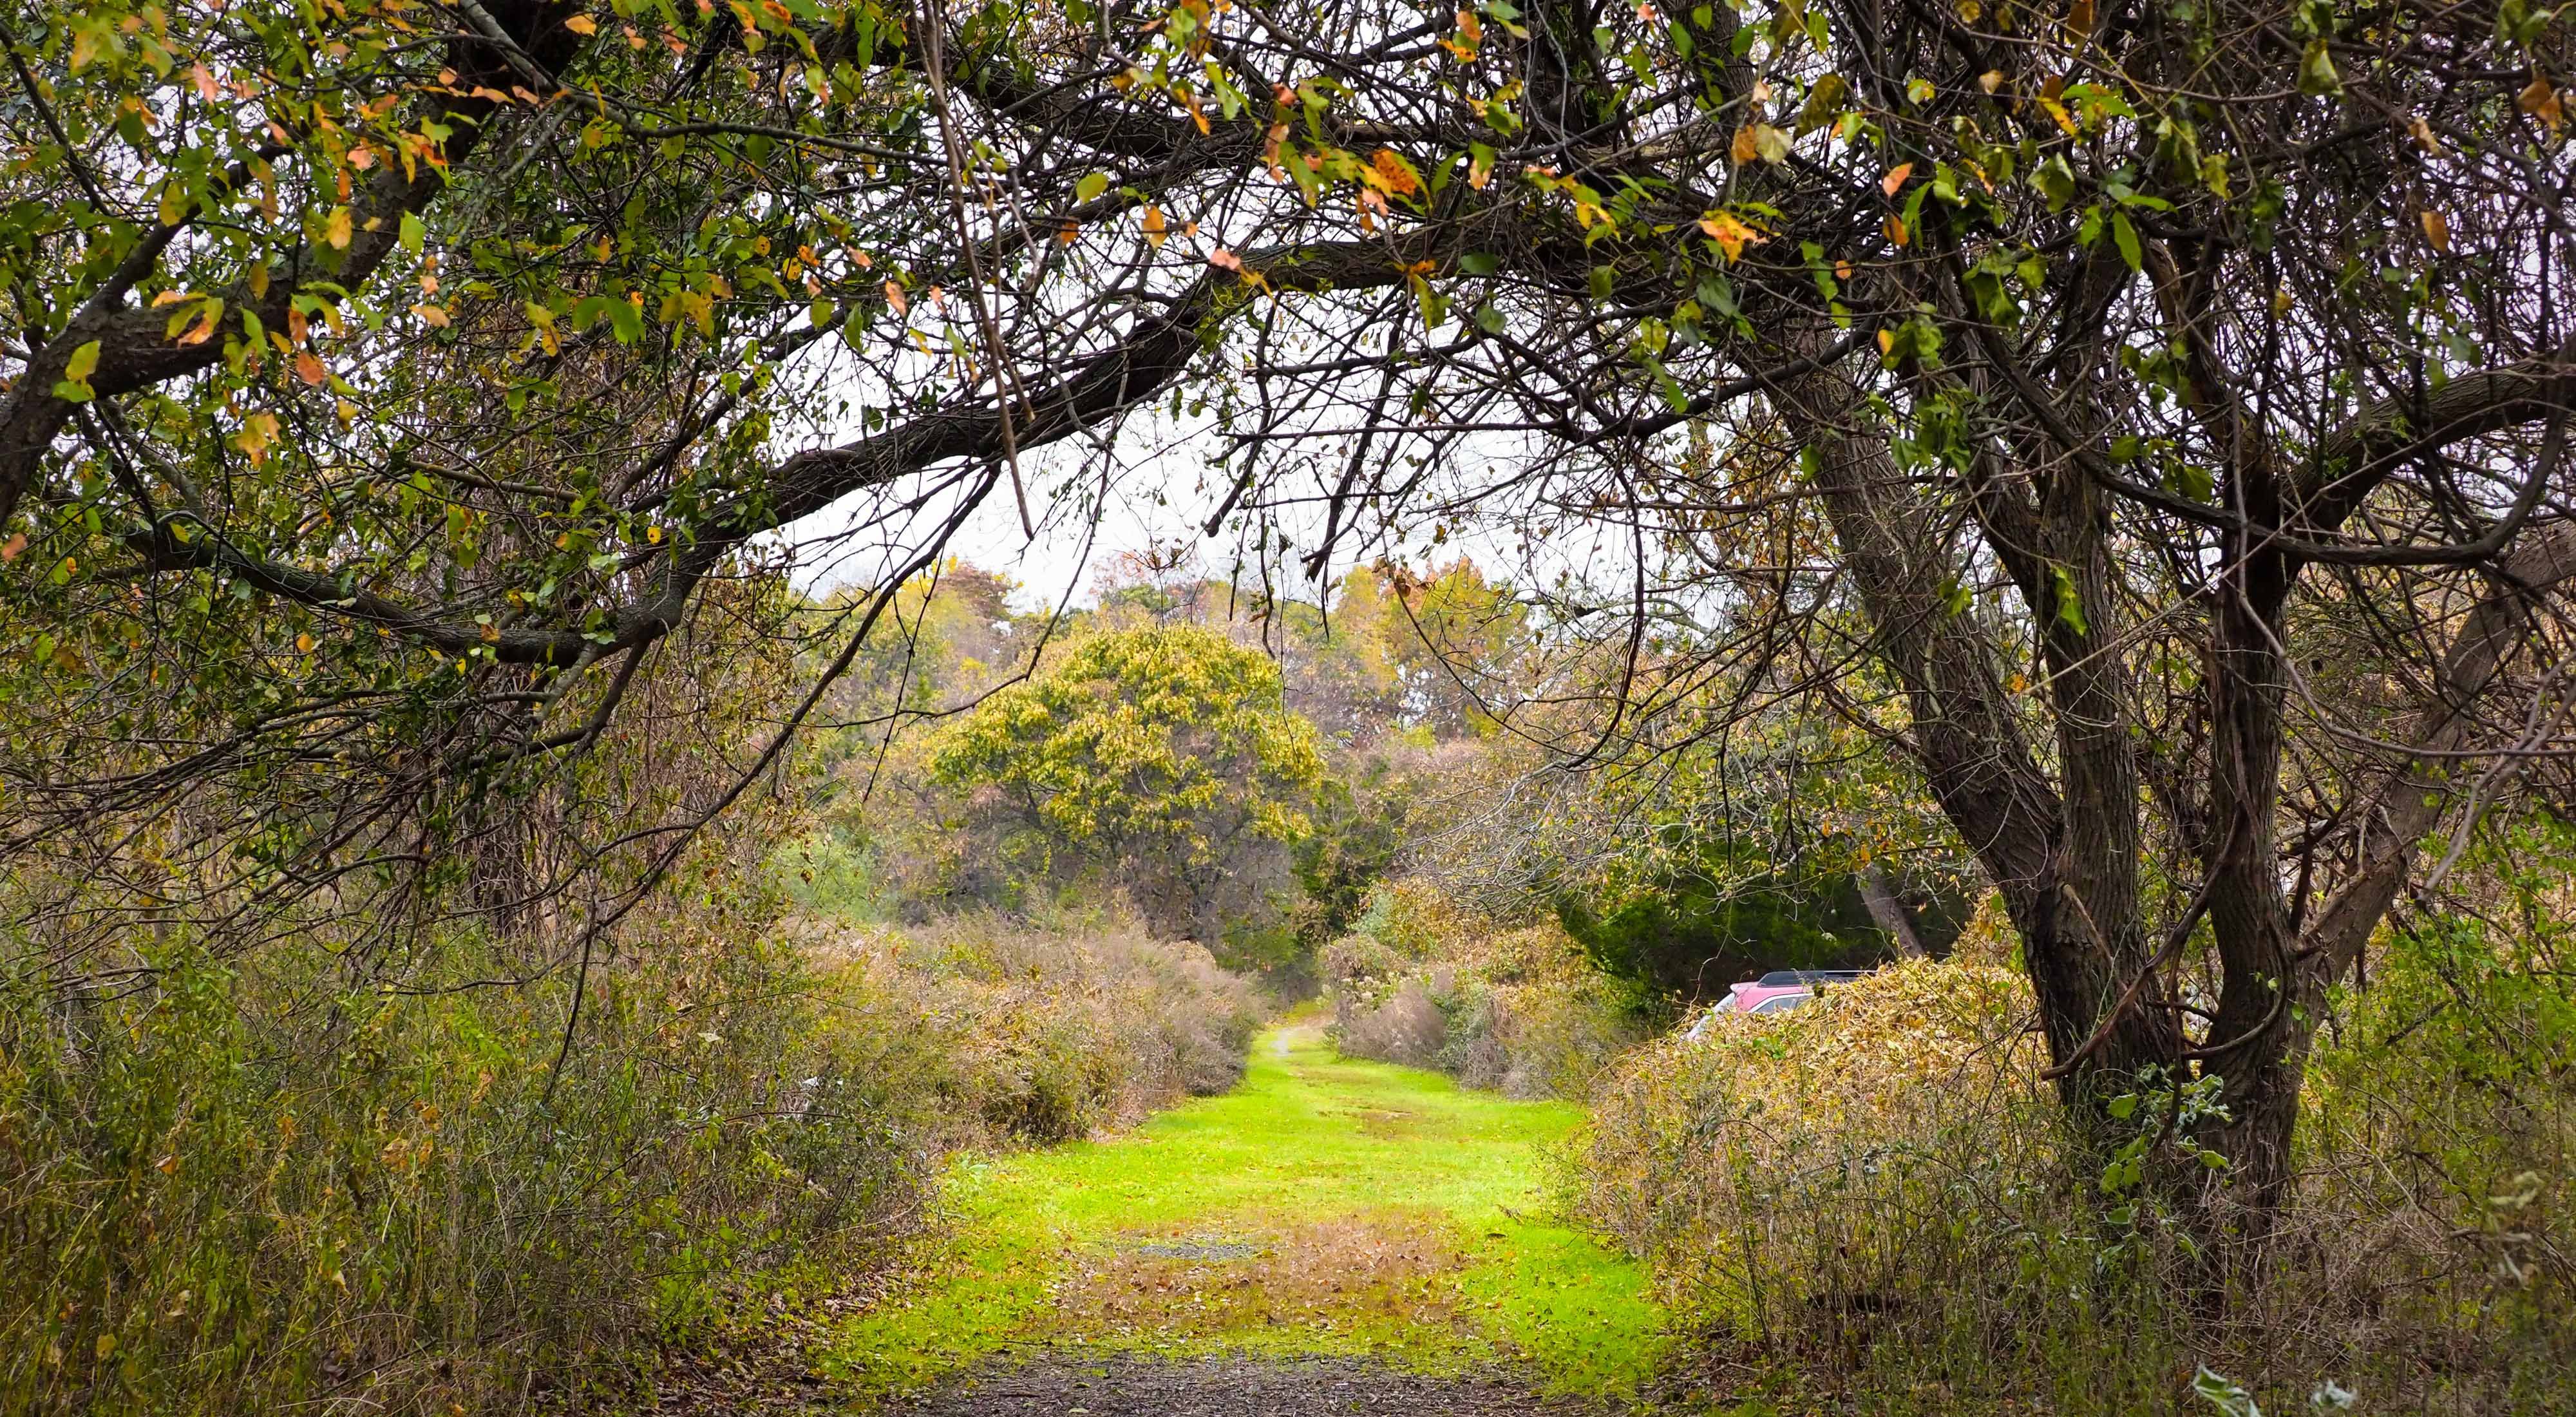 Trail on a beautiful fall day at the David Weld Sanctuary on Long Island’s North Shore.